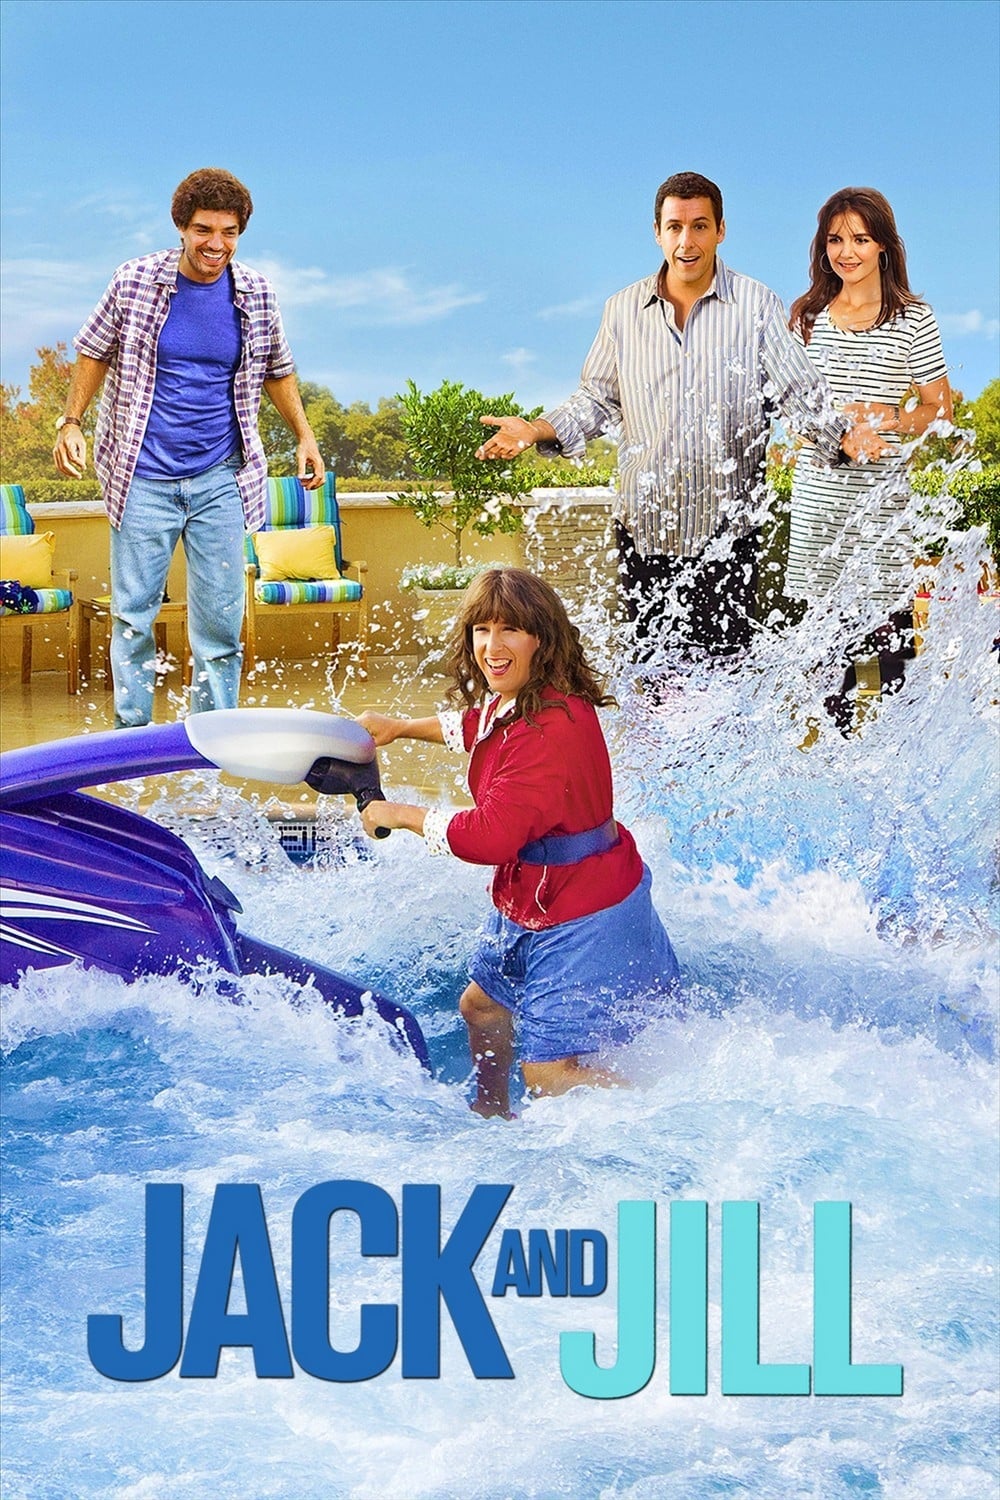 jack and jill movie review